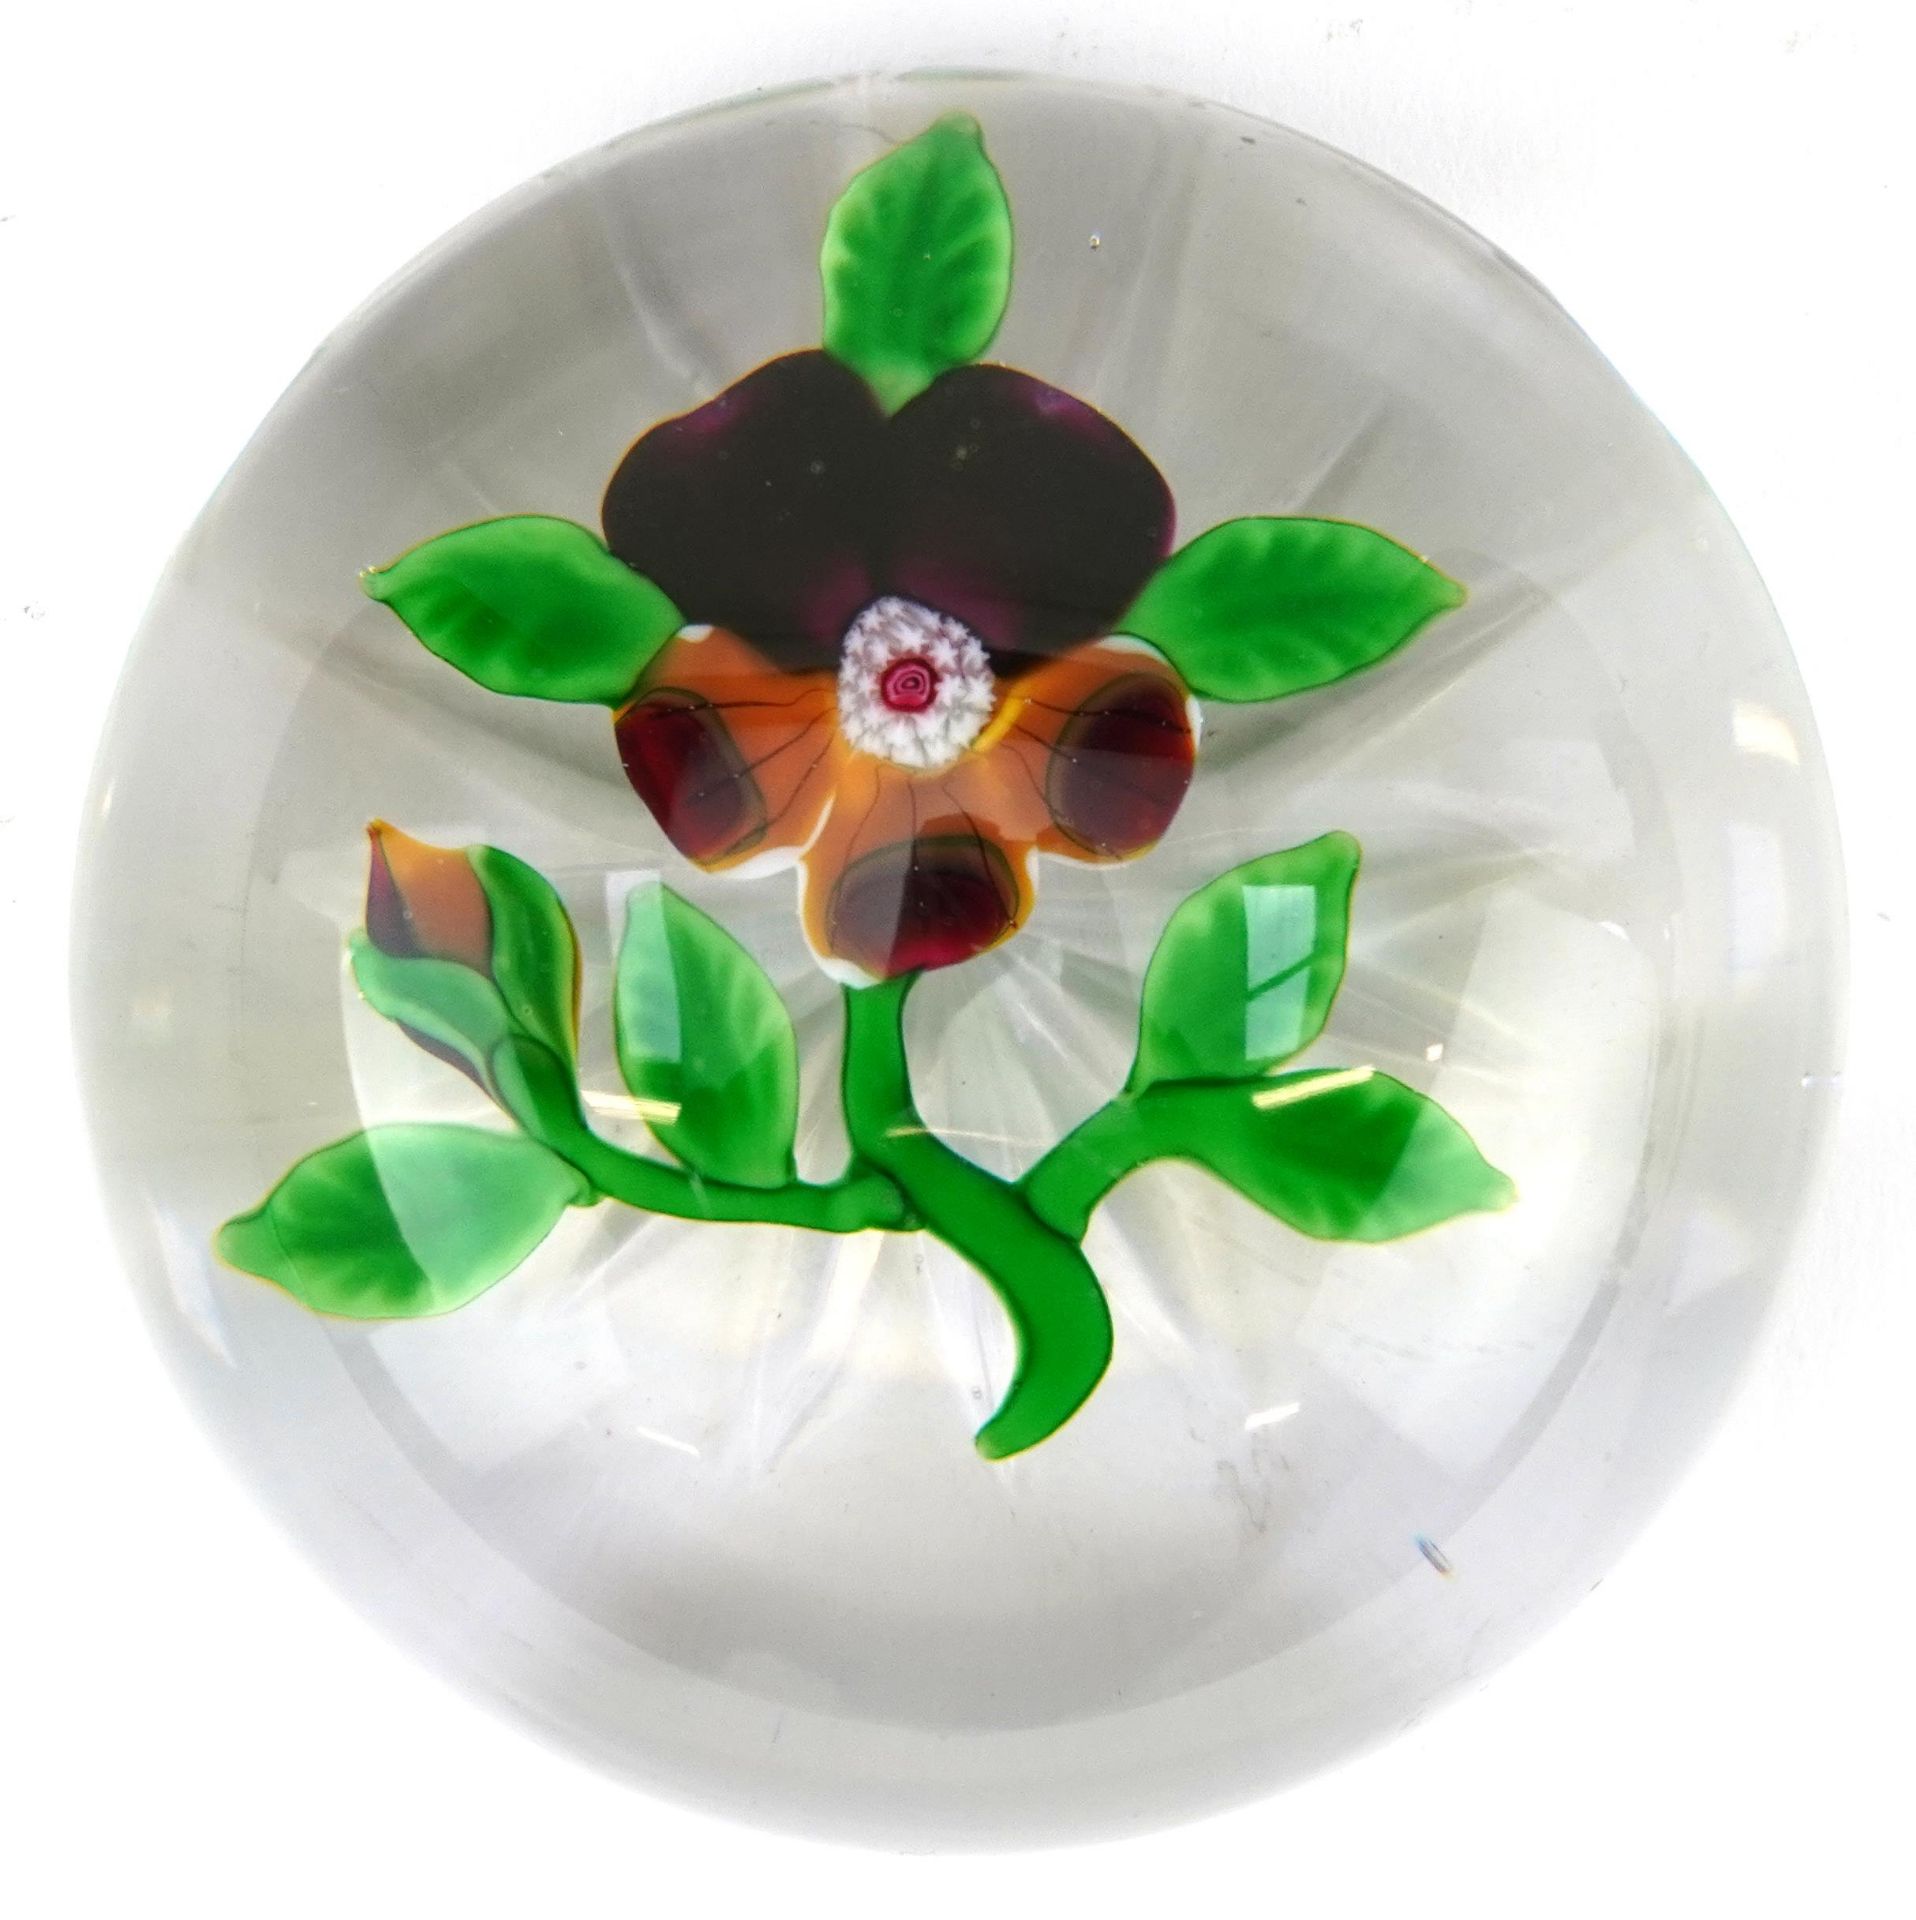 Antique Baccarat pansy paperweight 8cm in diameter - Image 2 of 3